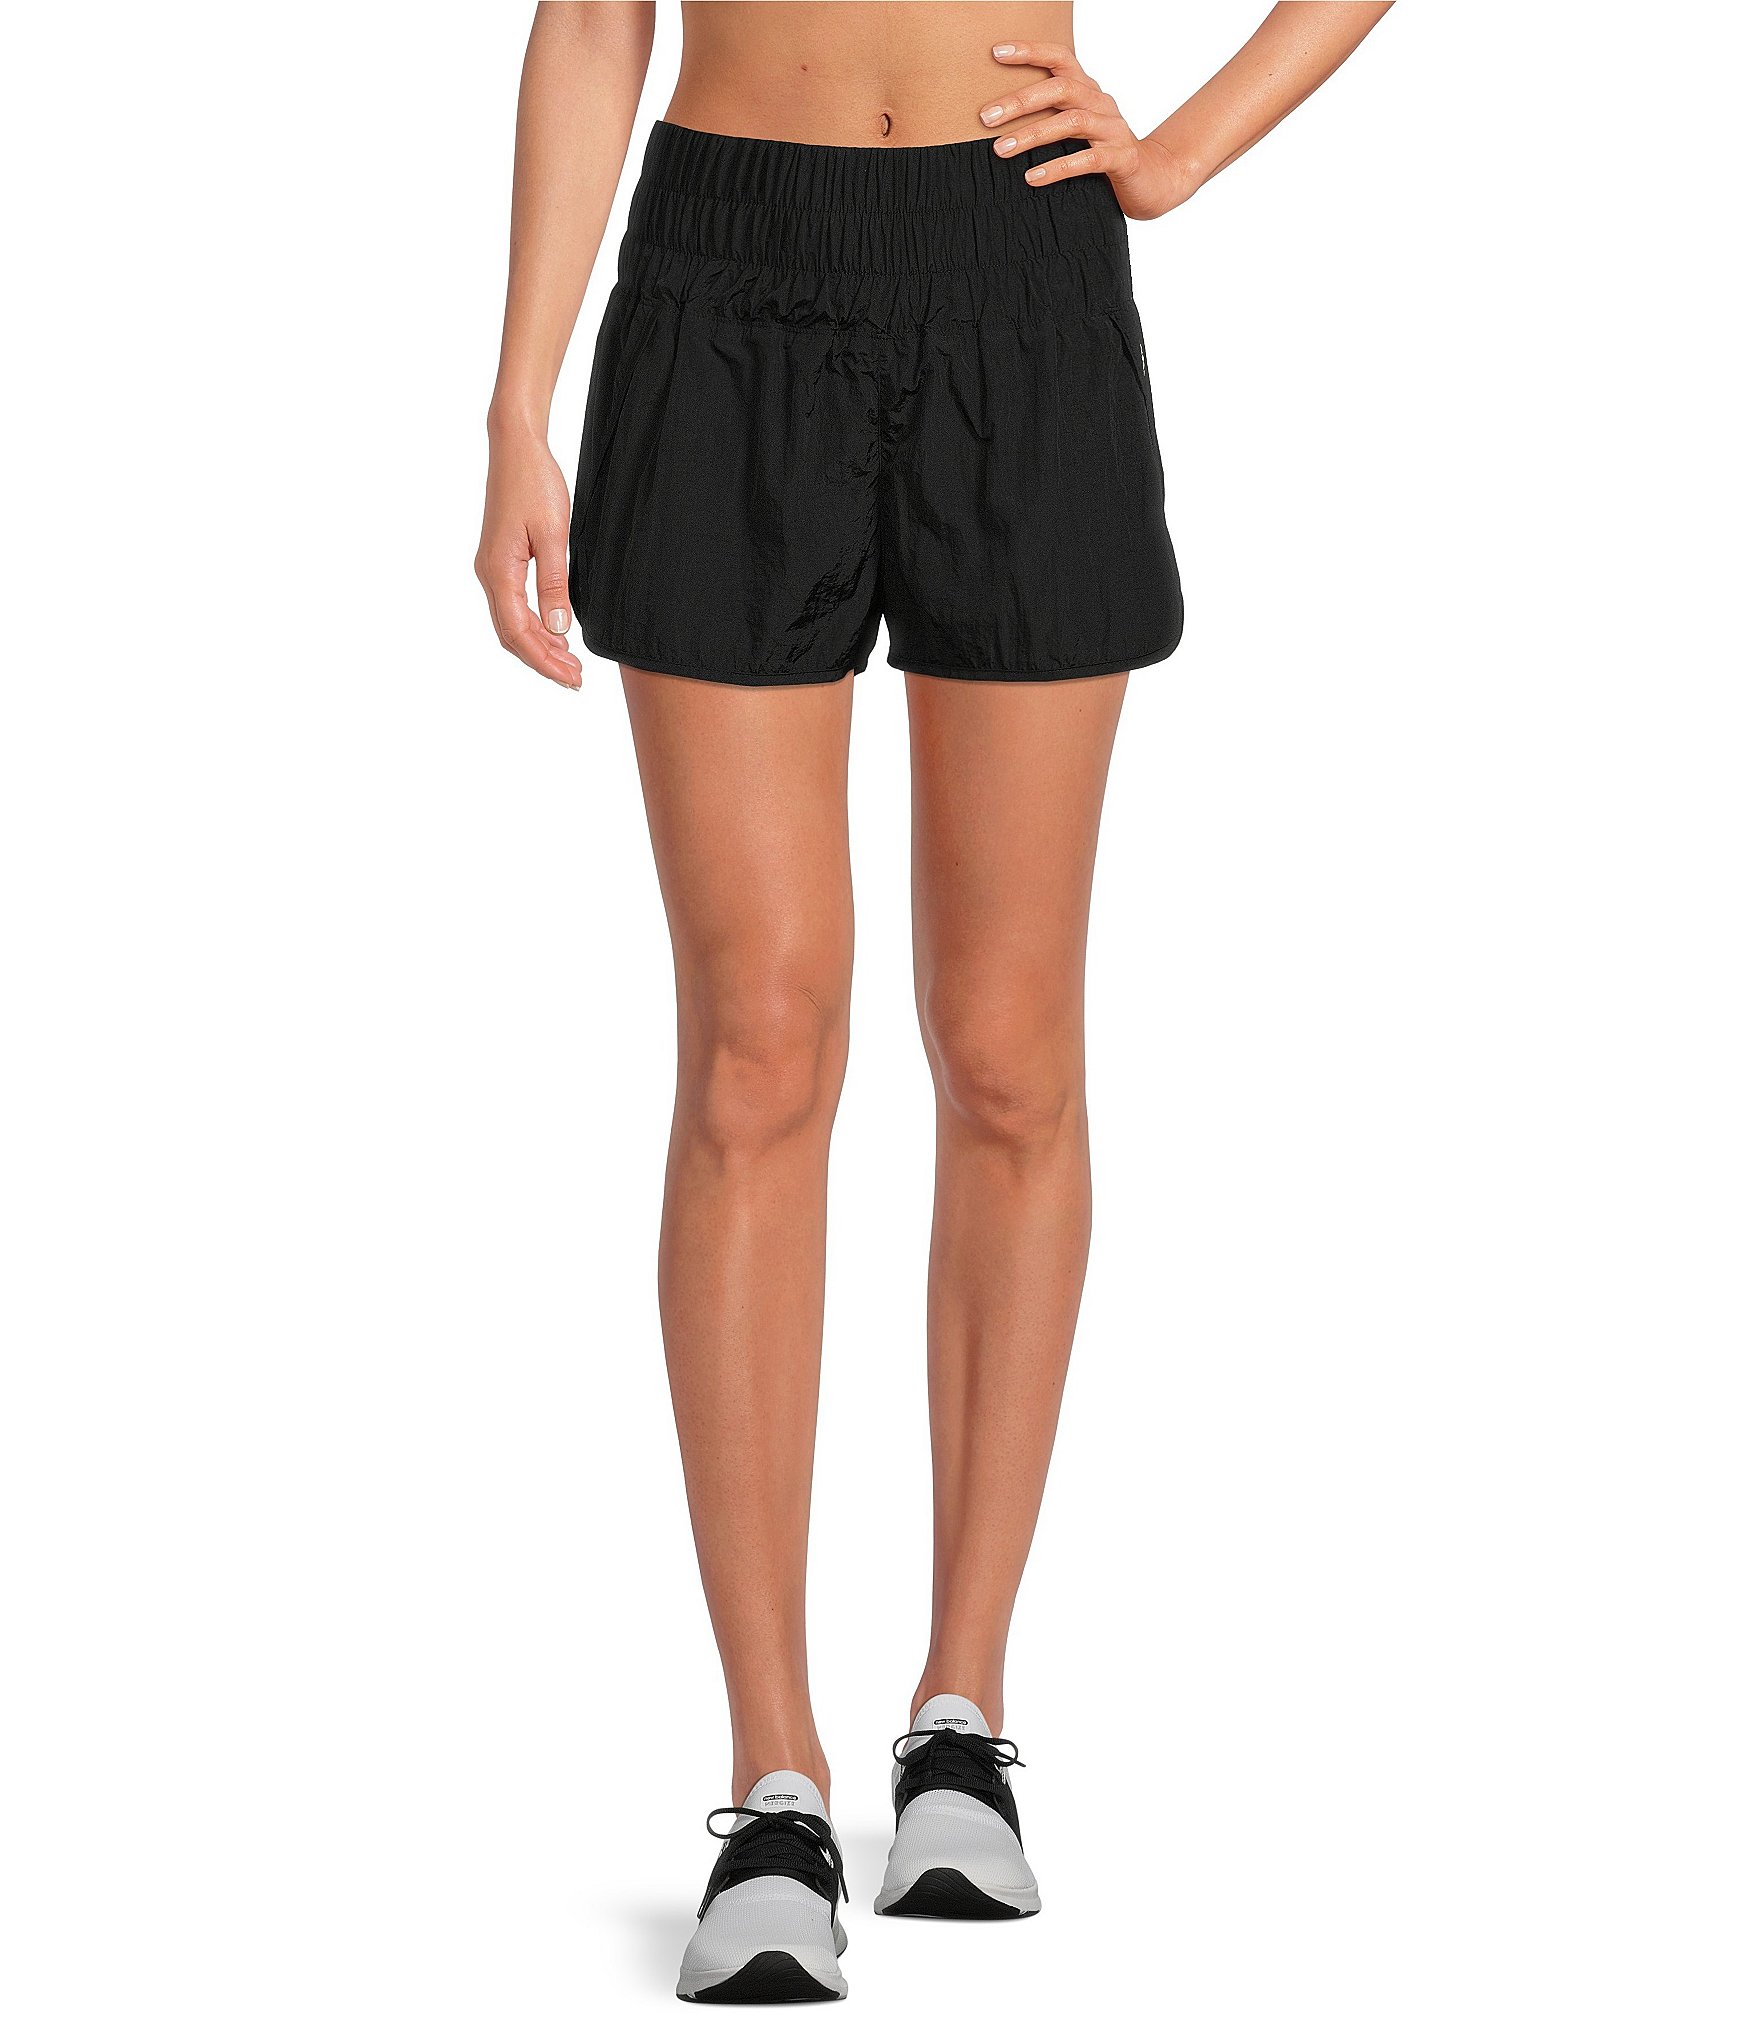 FREE PEOPLE THE WAY HOME PRINTED SHORTS - EMPIRE JEWEL – Move Athleisure